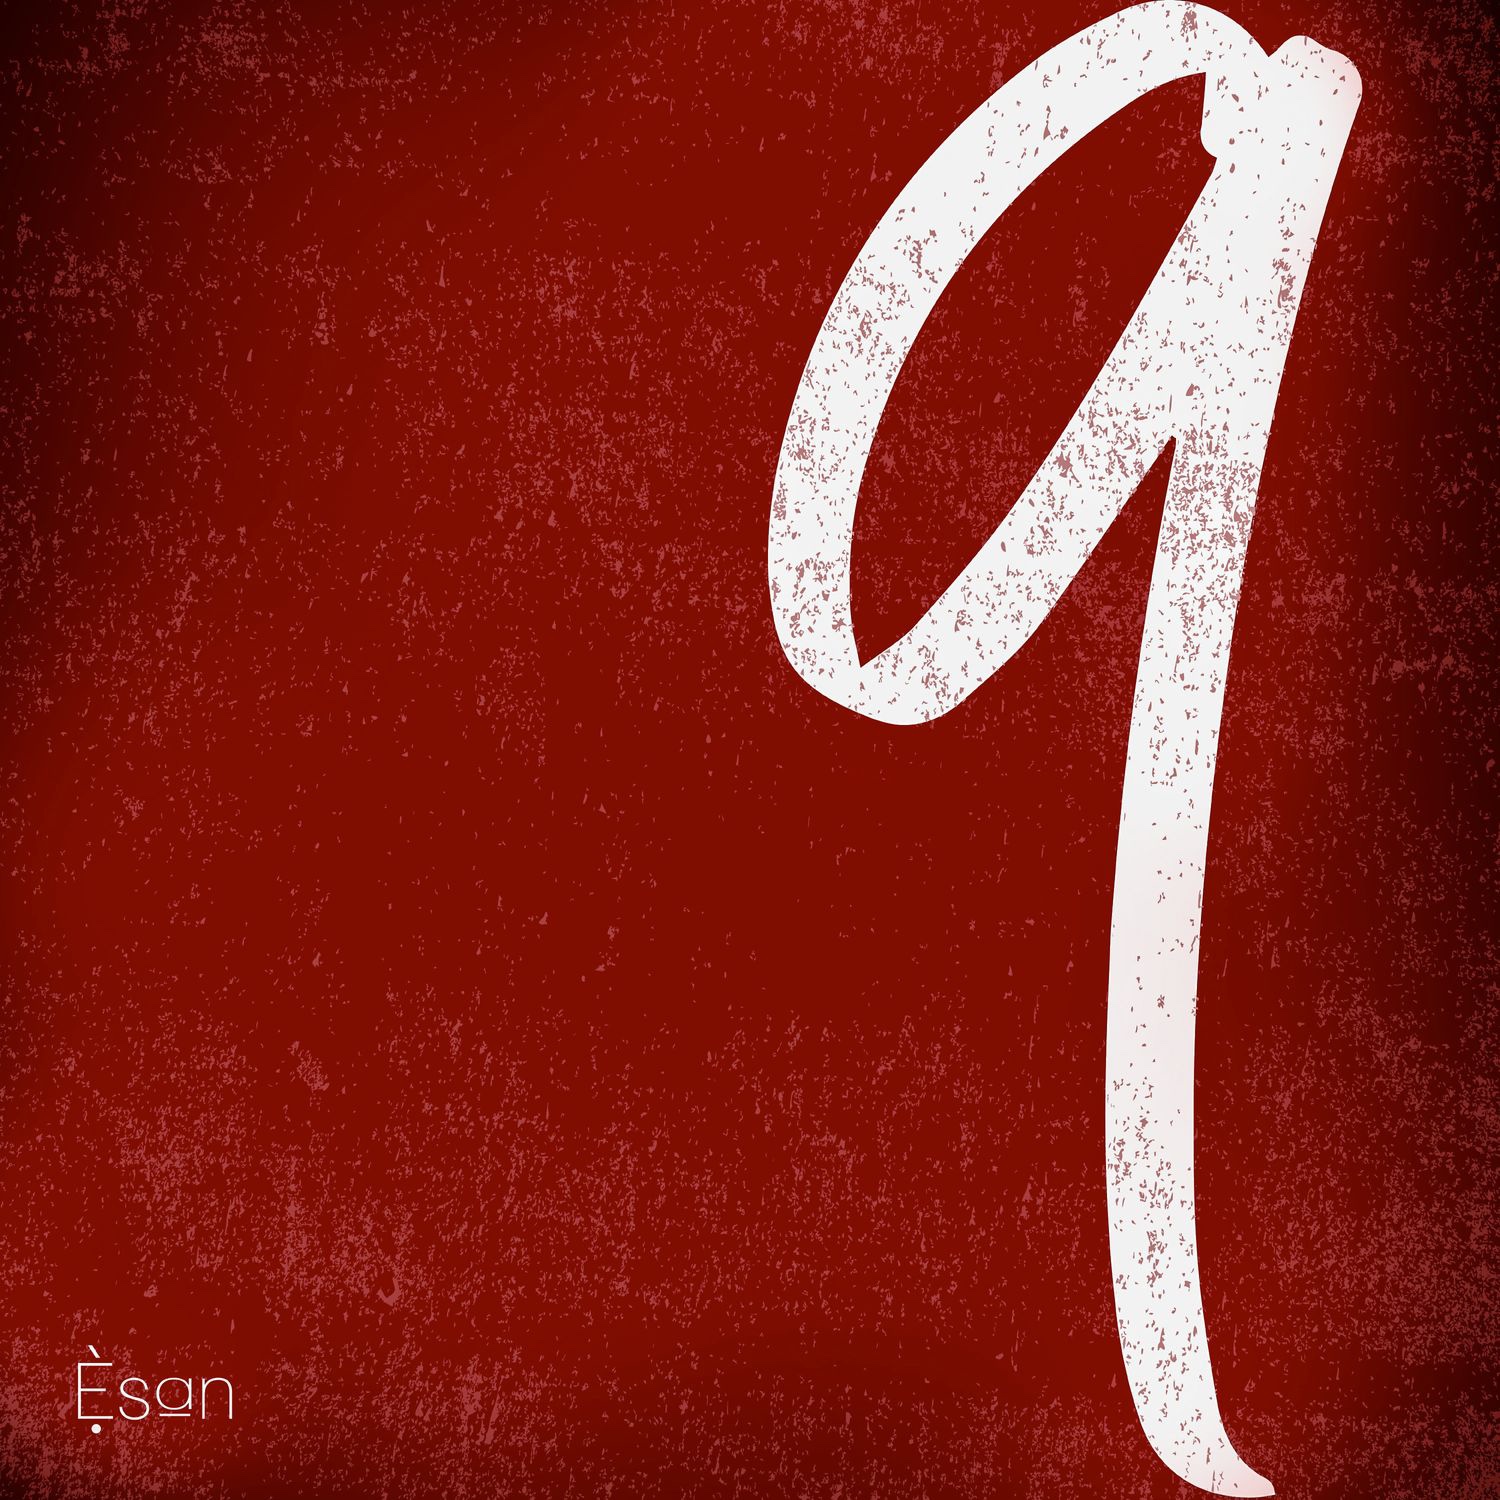 Afro artist, Brymo returns with a new album titled “9 – Esan”.